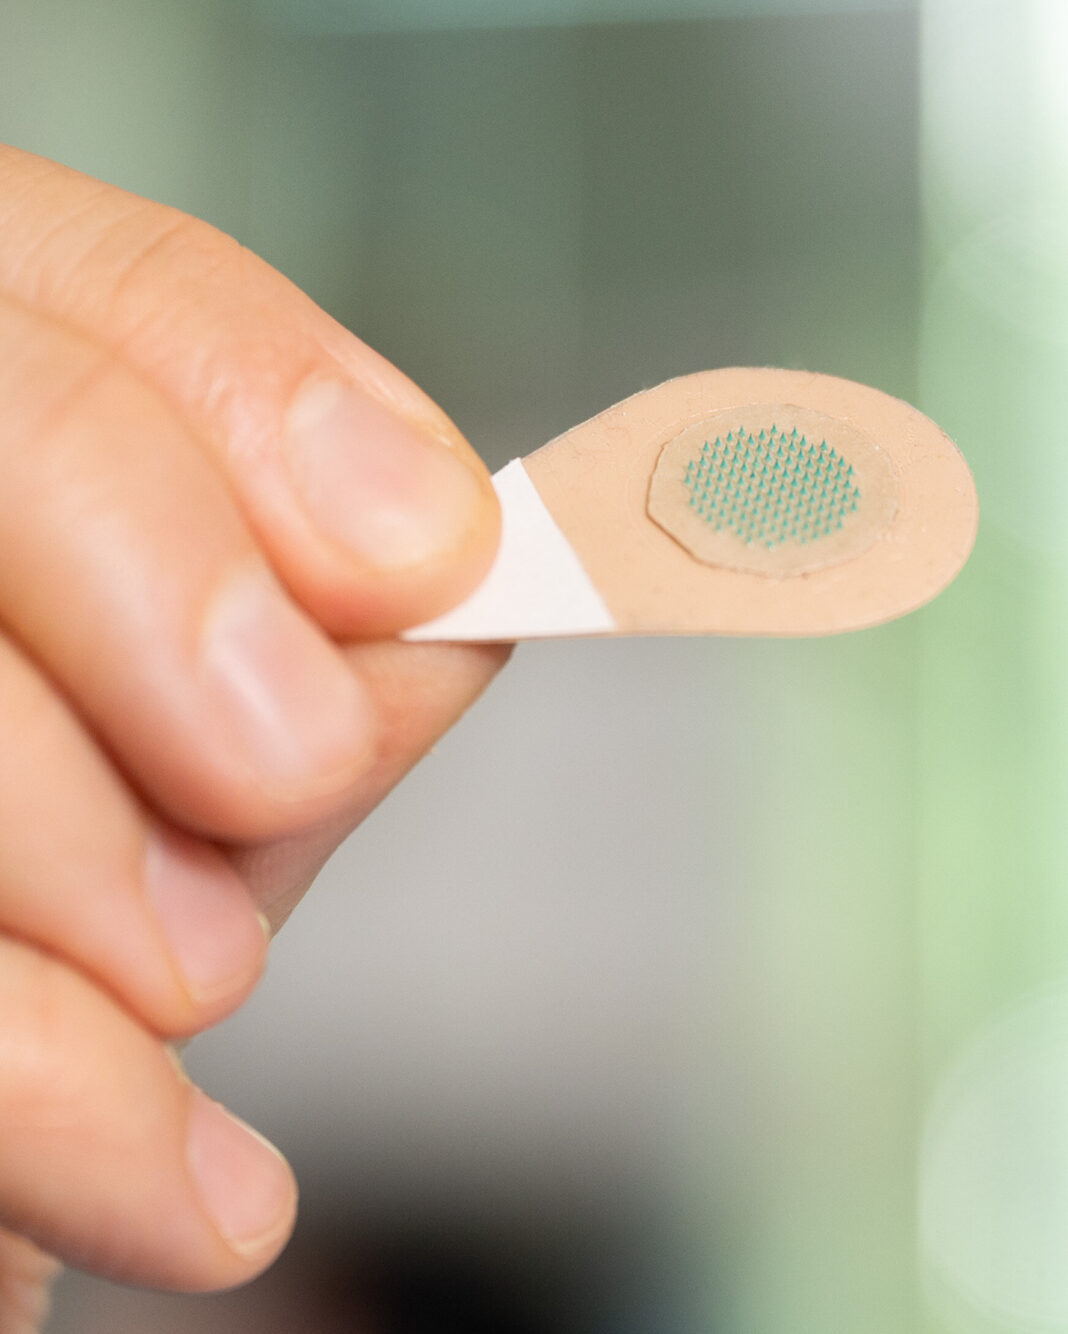 Researchers develop painless, self-administered tattoos